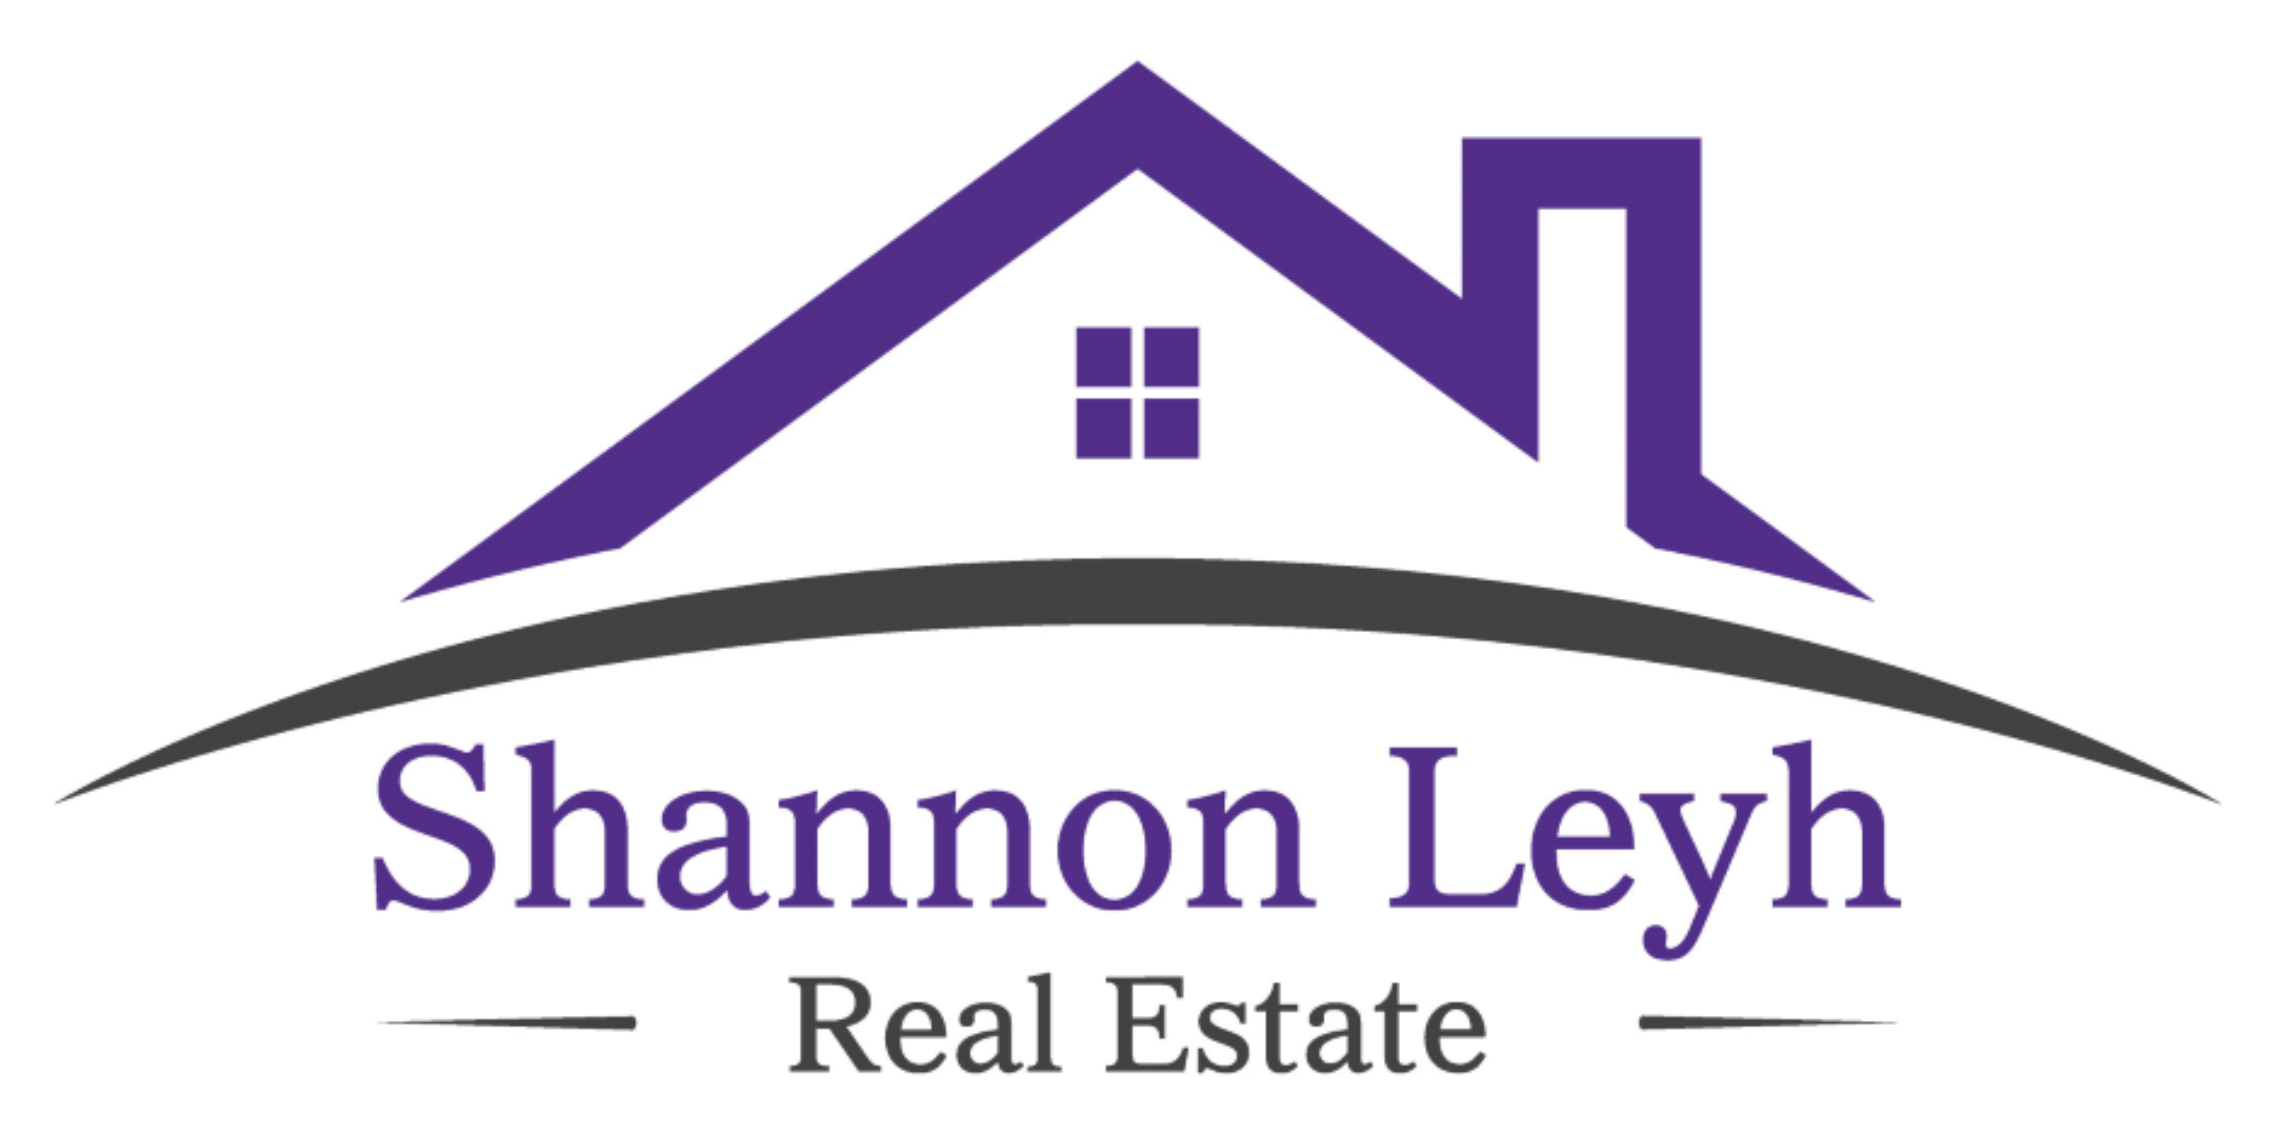 Shannon Leyh Real Estate